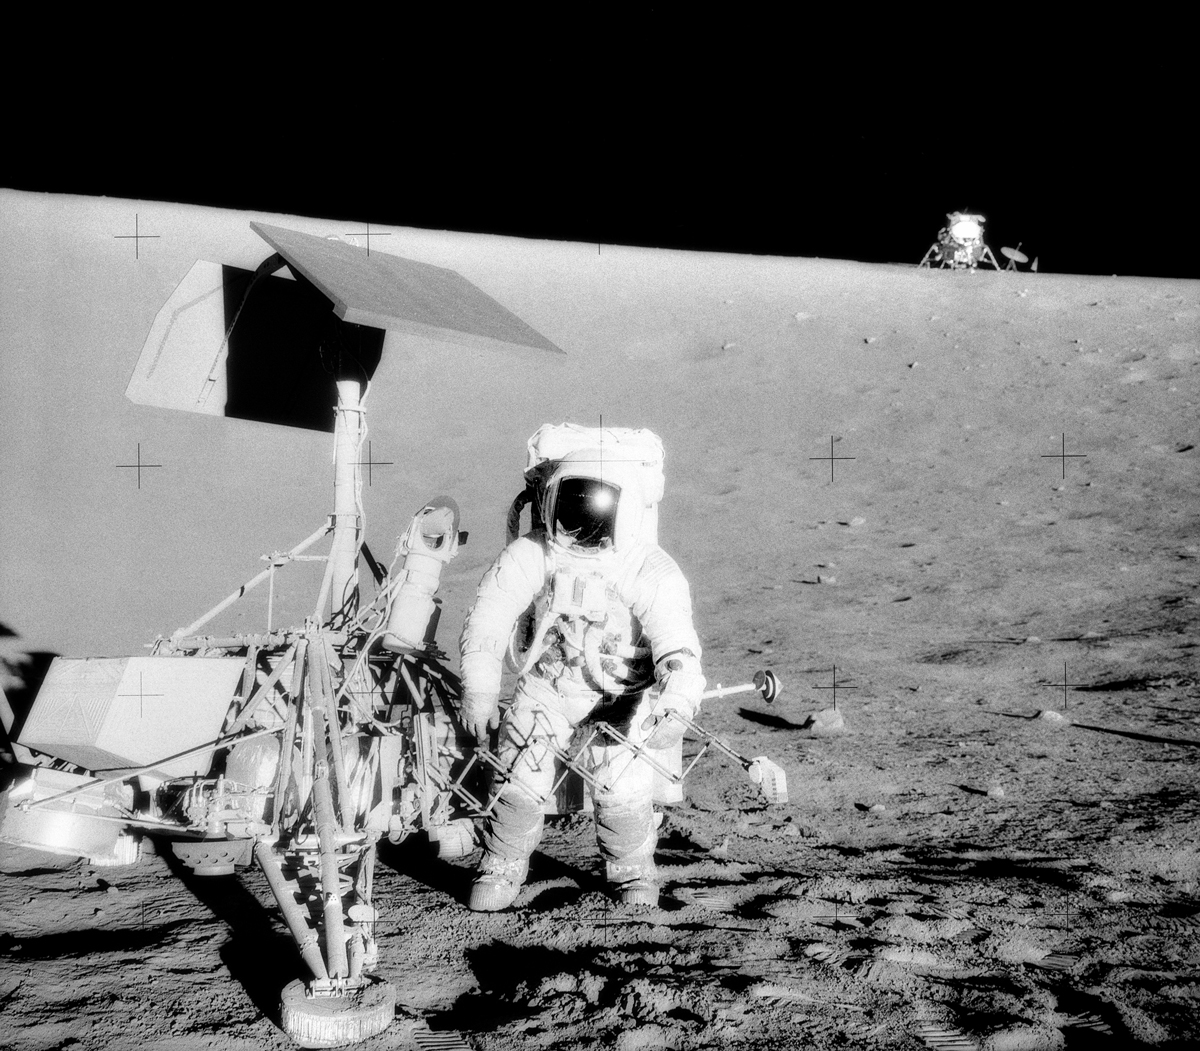 A person in a spacesuit standing next to a surveying craft on the surface of the moon with a lander in the background.